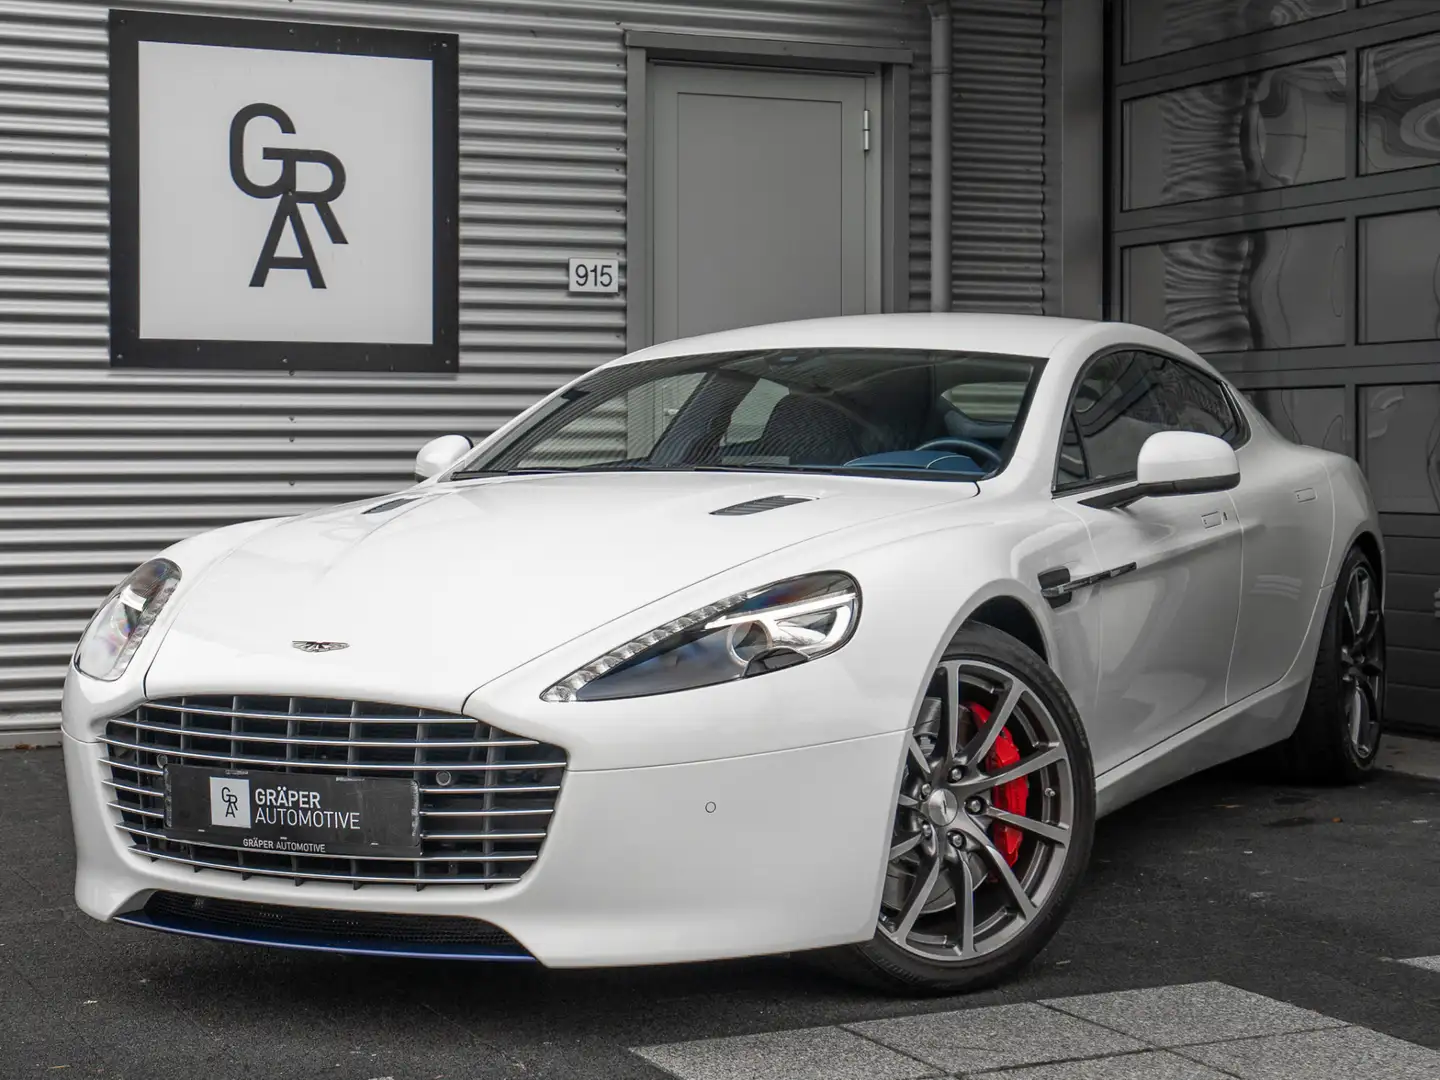 Aston Martin Rapide S 6.0 V12 ‘Britain is Great’ Edition by Q 1/8 Weiß - 1